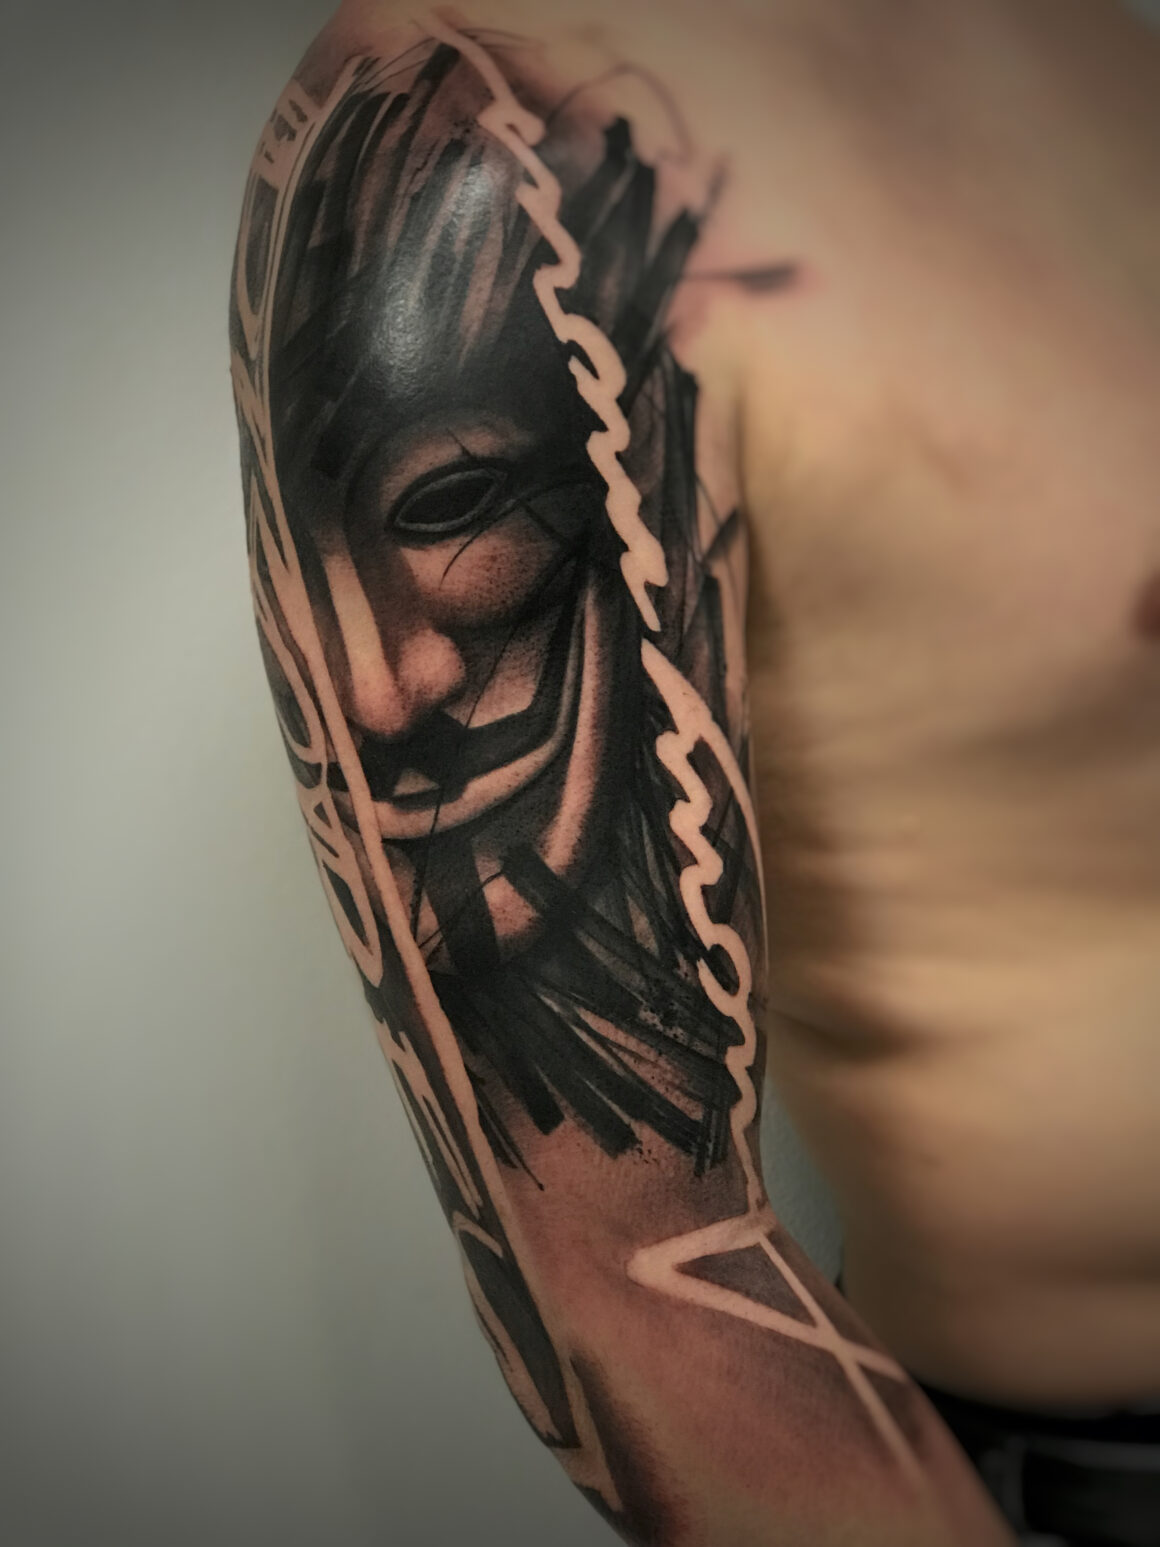 Tattoo by Stef Krief, @stef_illusion_of_light